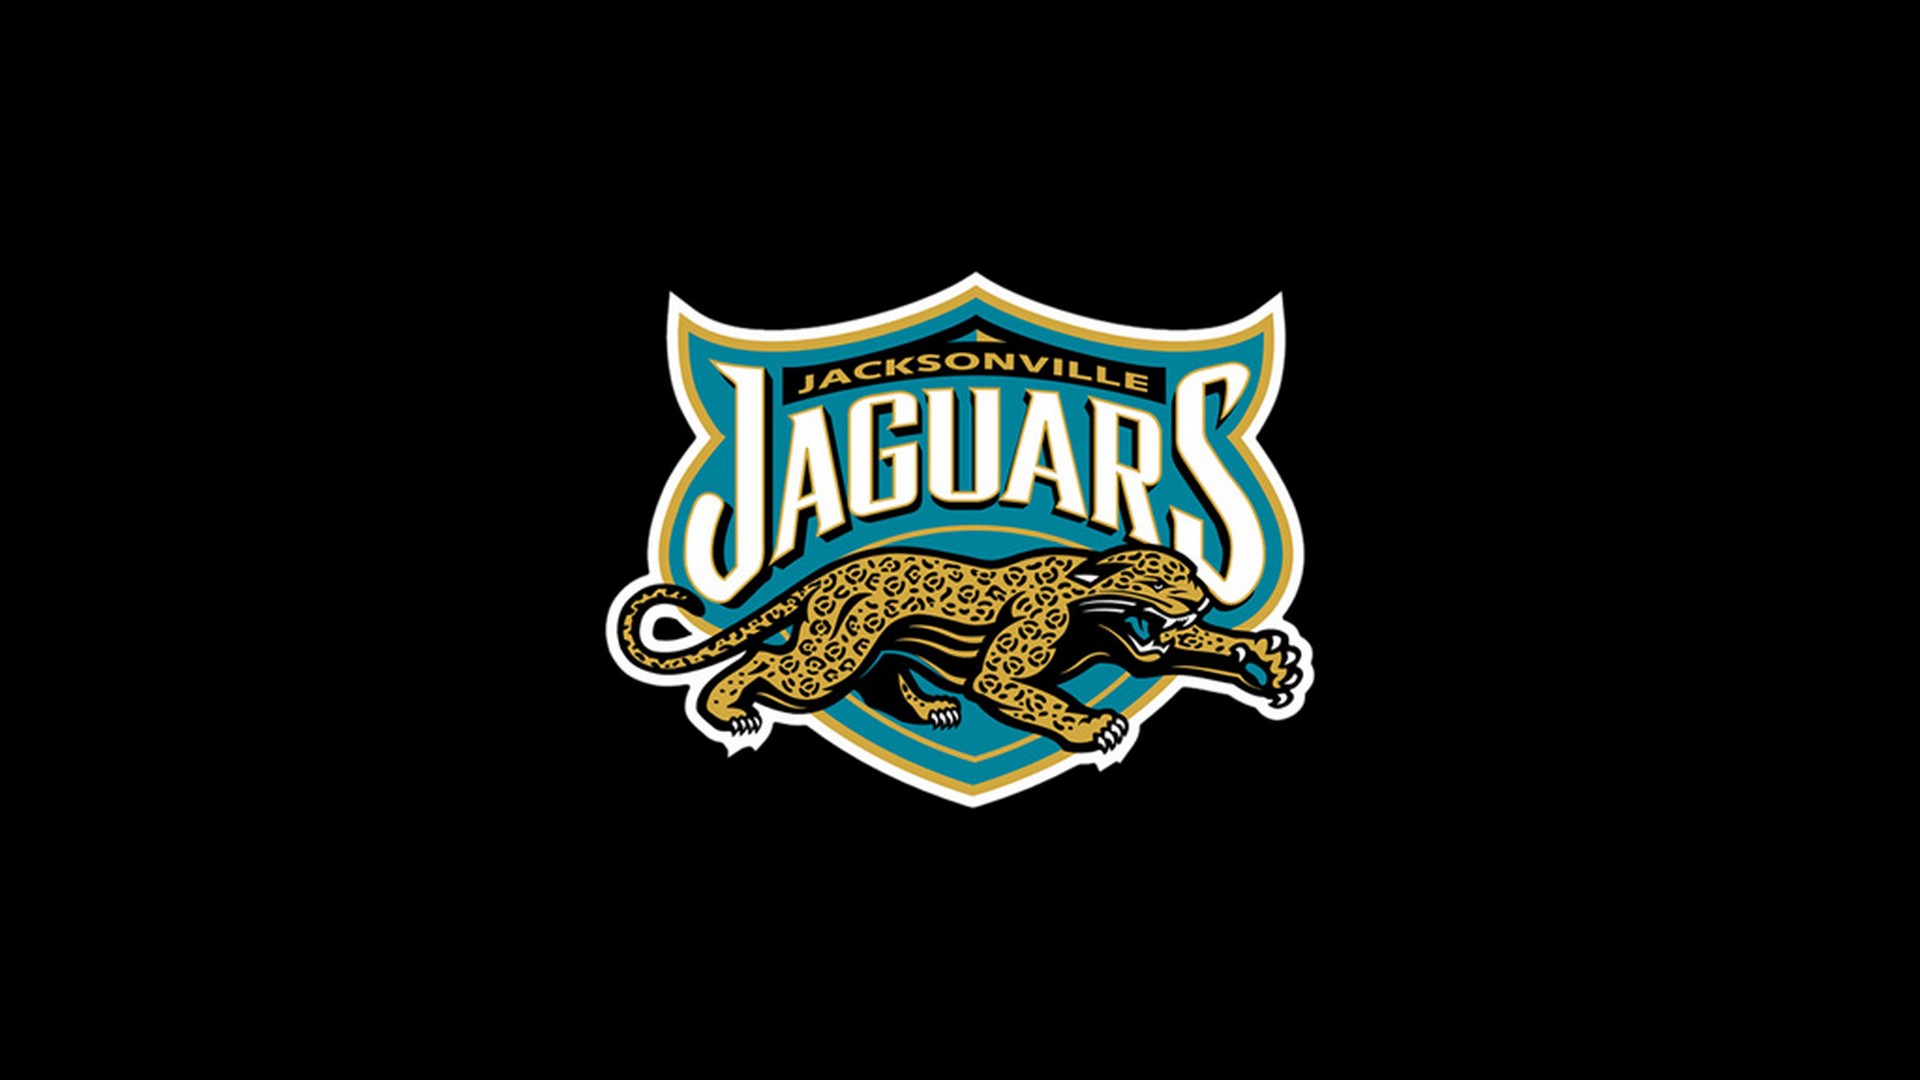 Wallpapers HD Jacksonville Jaguars with resolution 1920x1080 pixel. You can make this wallpaper for your Mac or Windows Desktop Background, iPhone, Android or Tablet and another Smartphone device